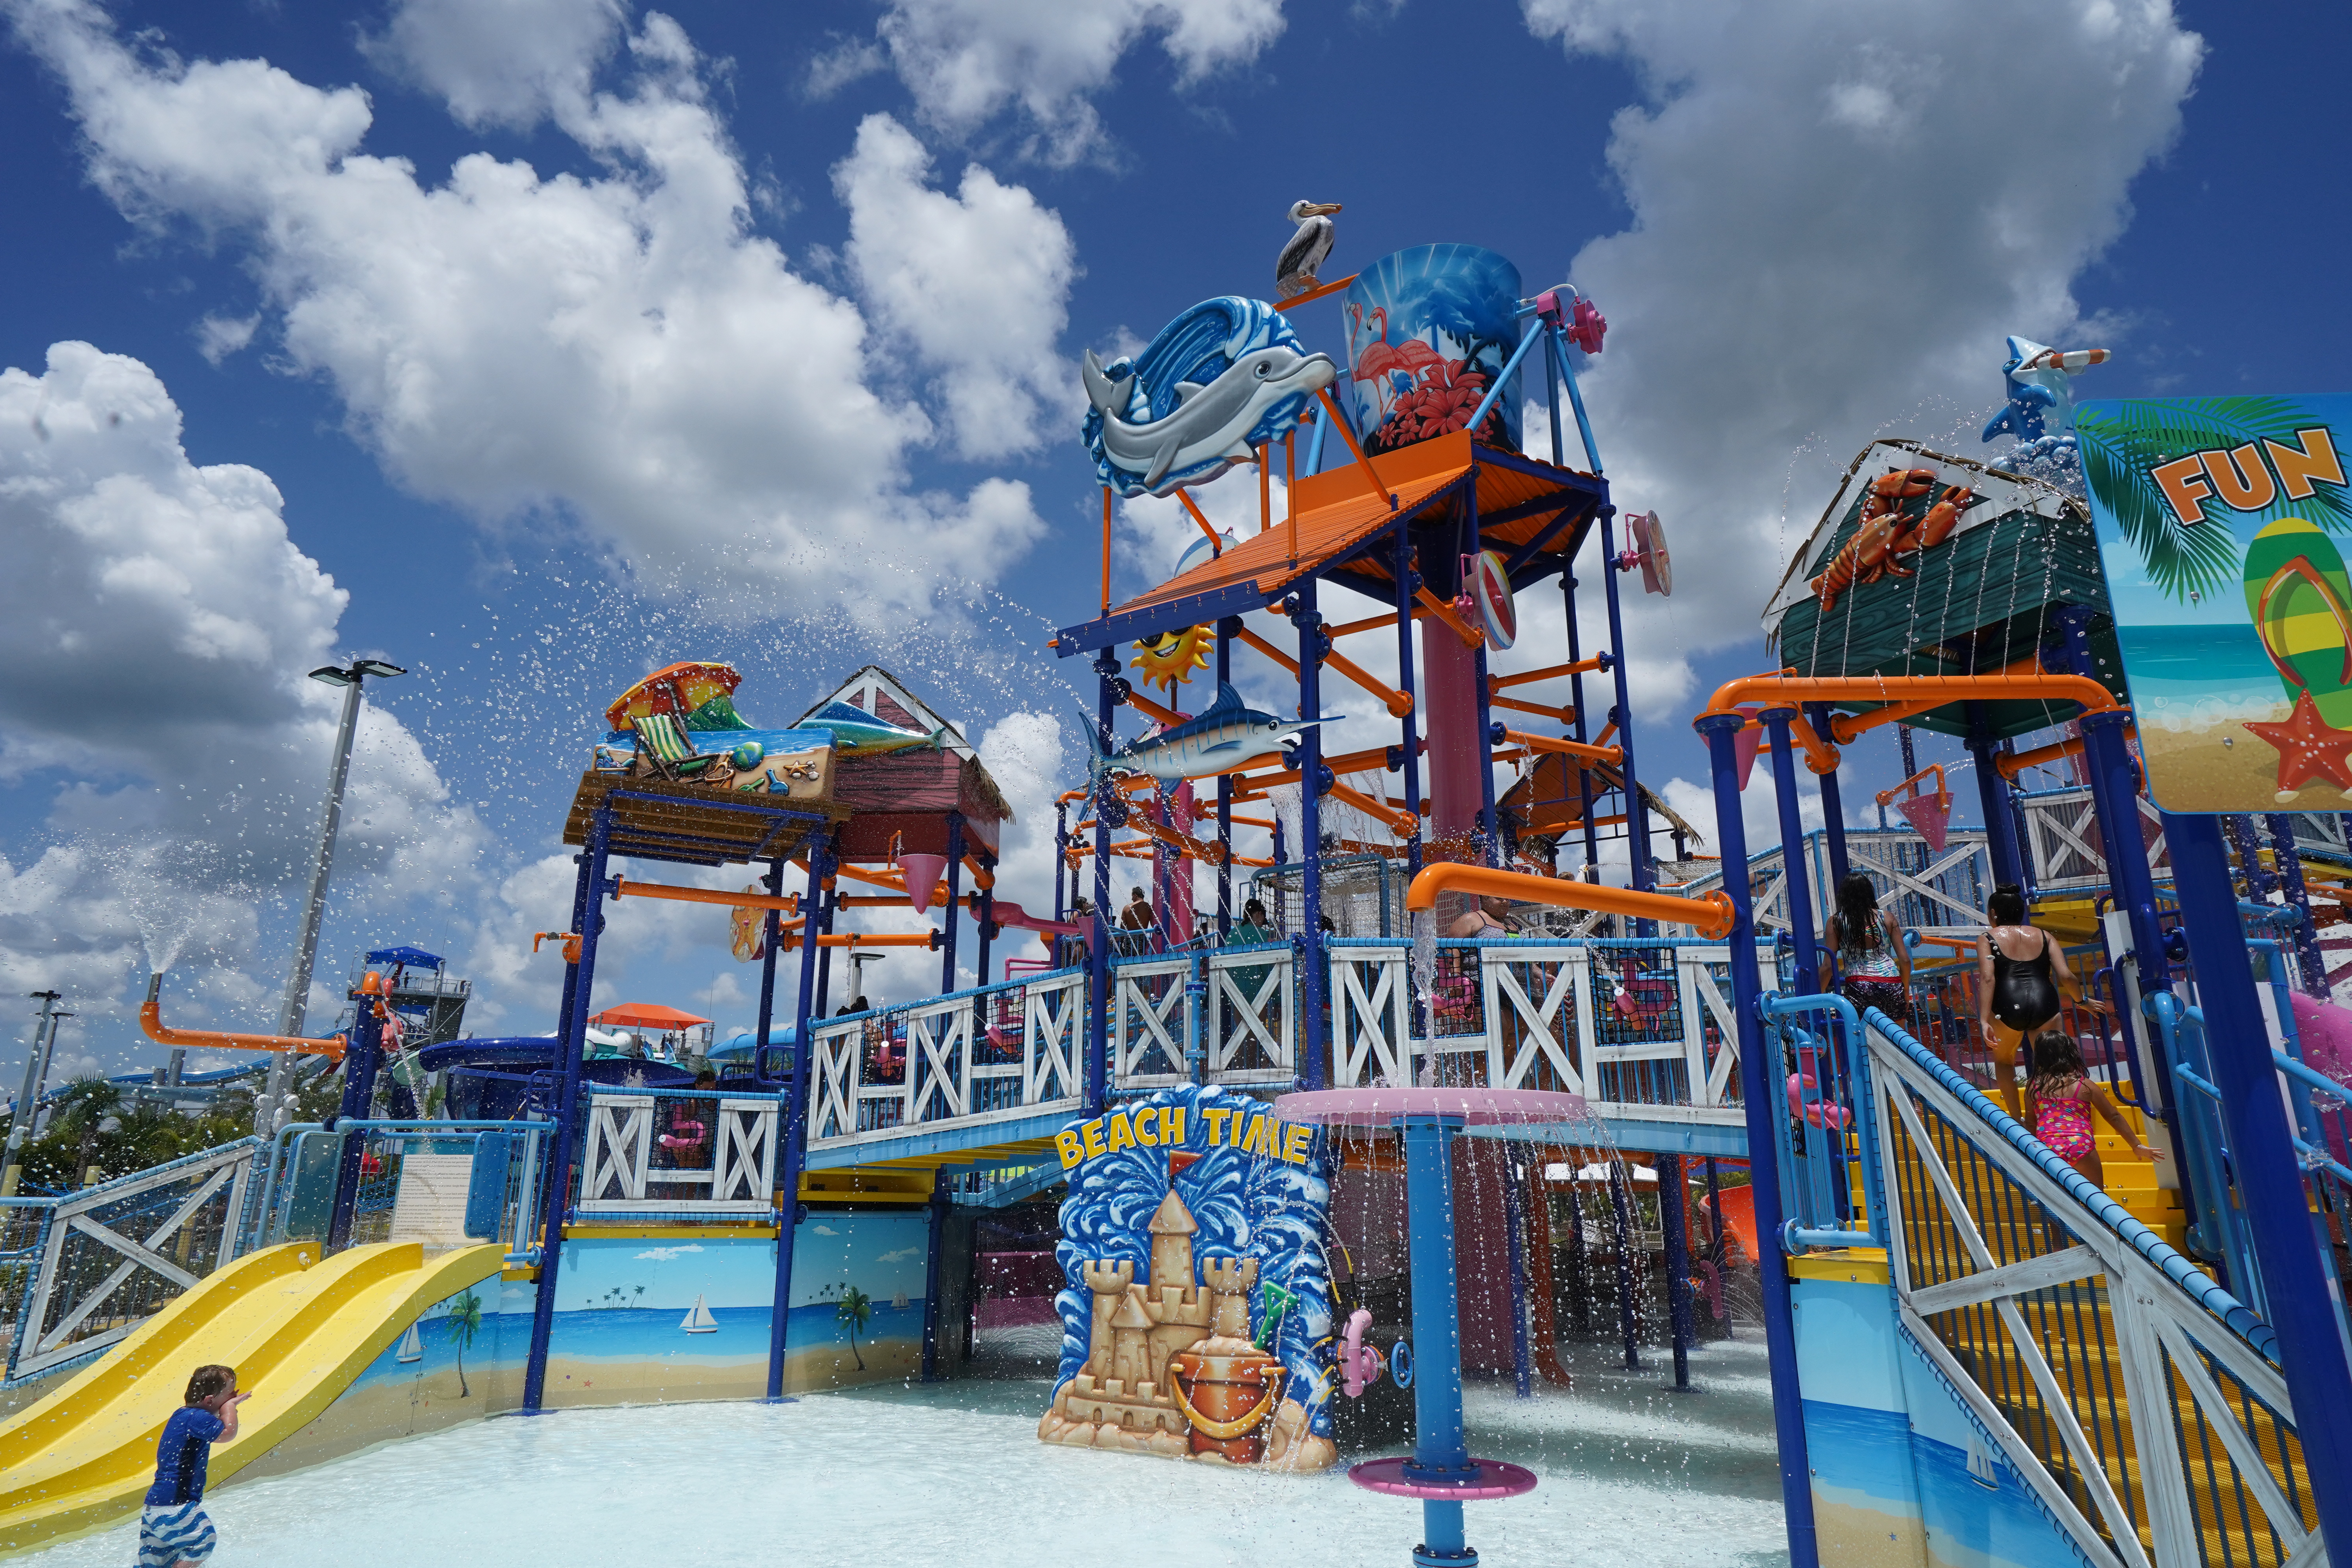 Splash Island water park feature on a partly cloudy day.